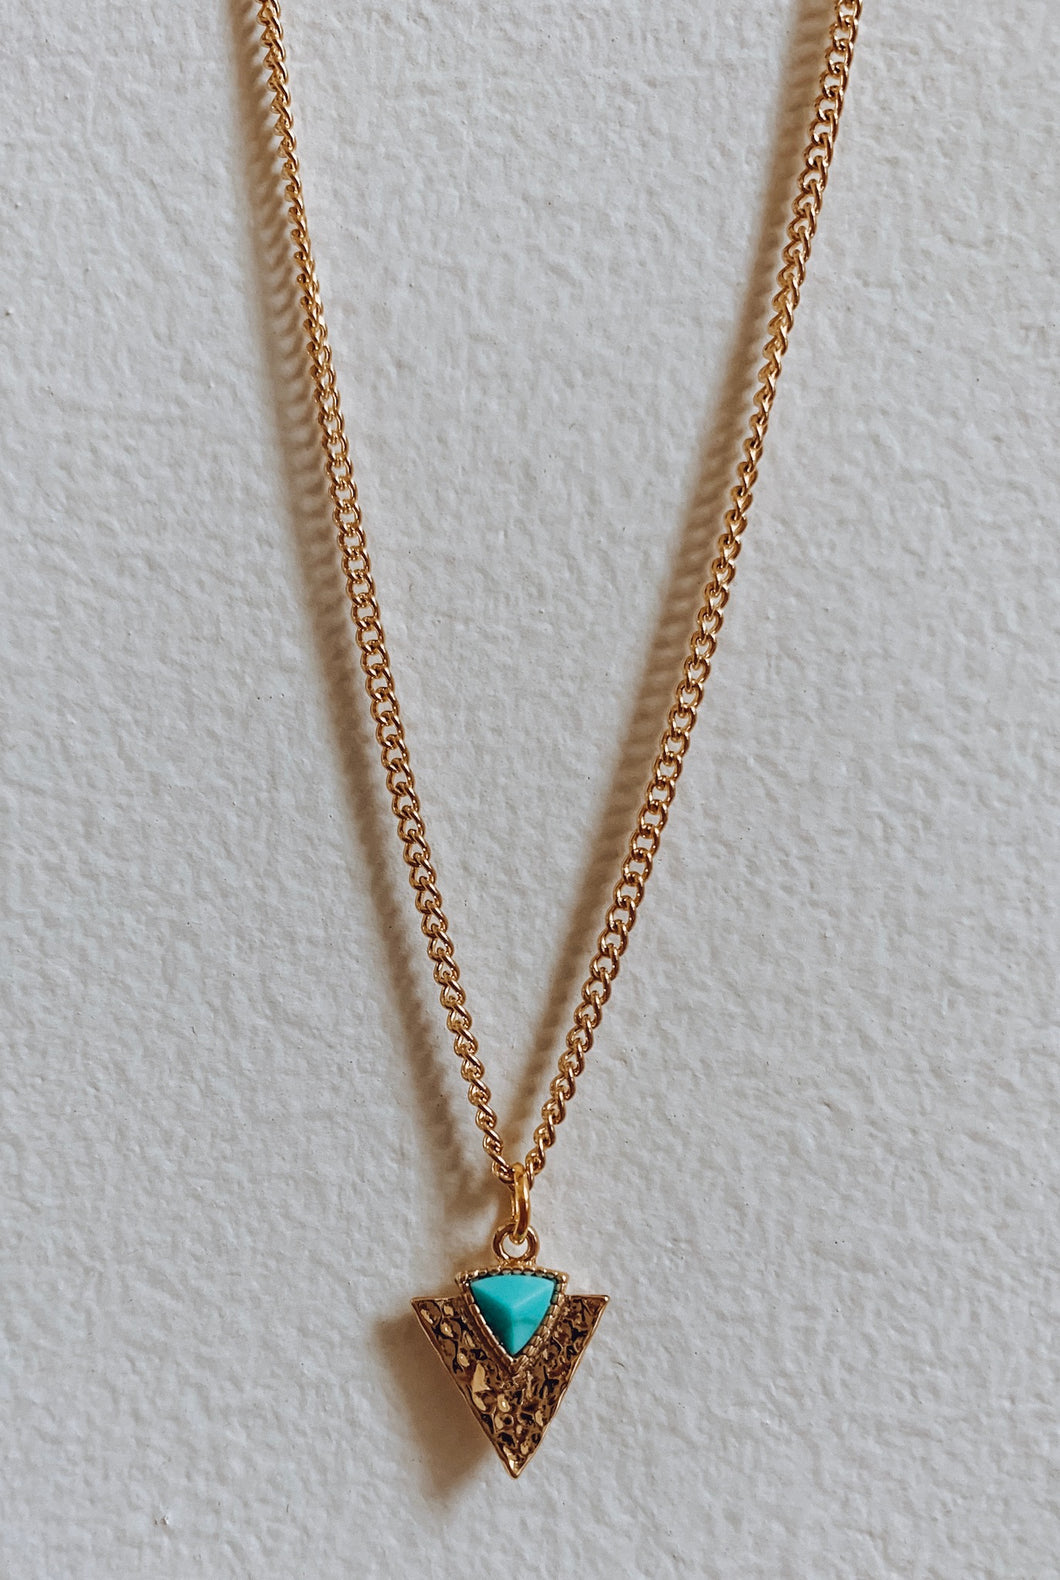 Gold and Turquoise Arrowhead Necklace